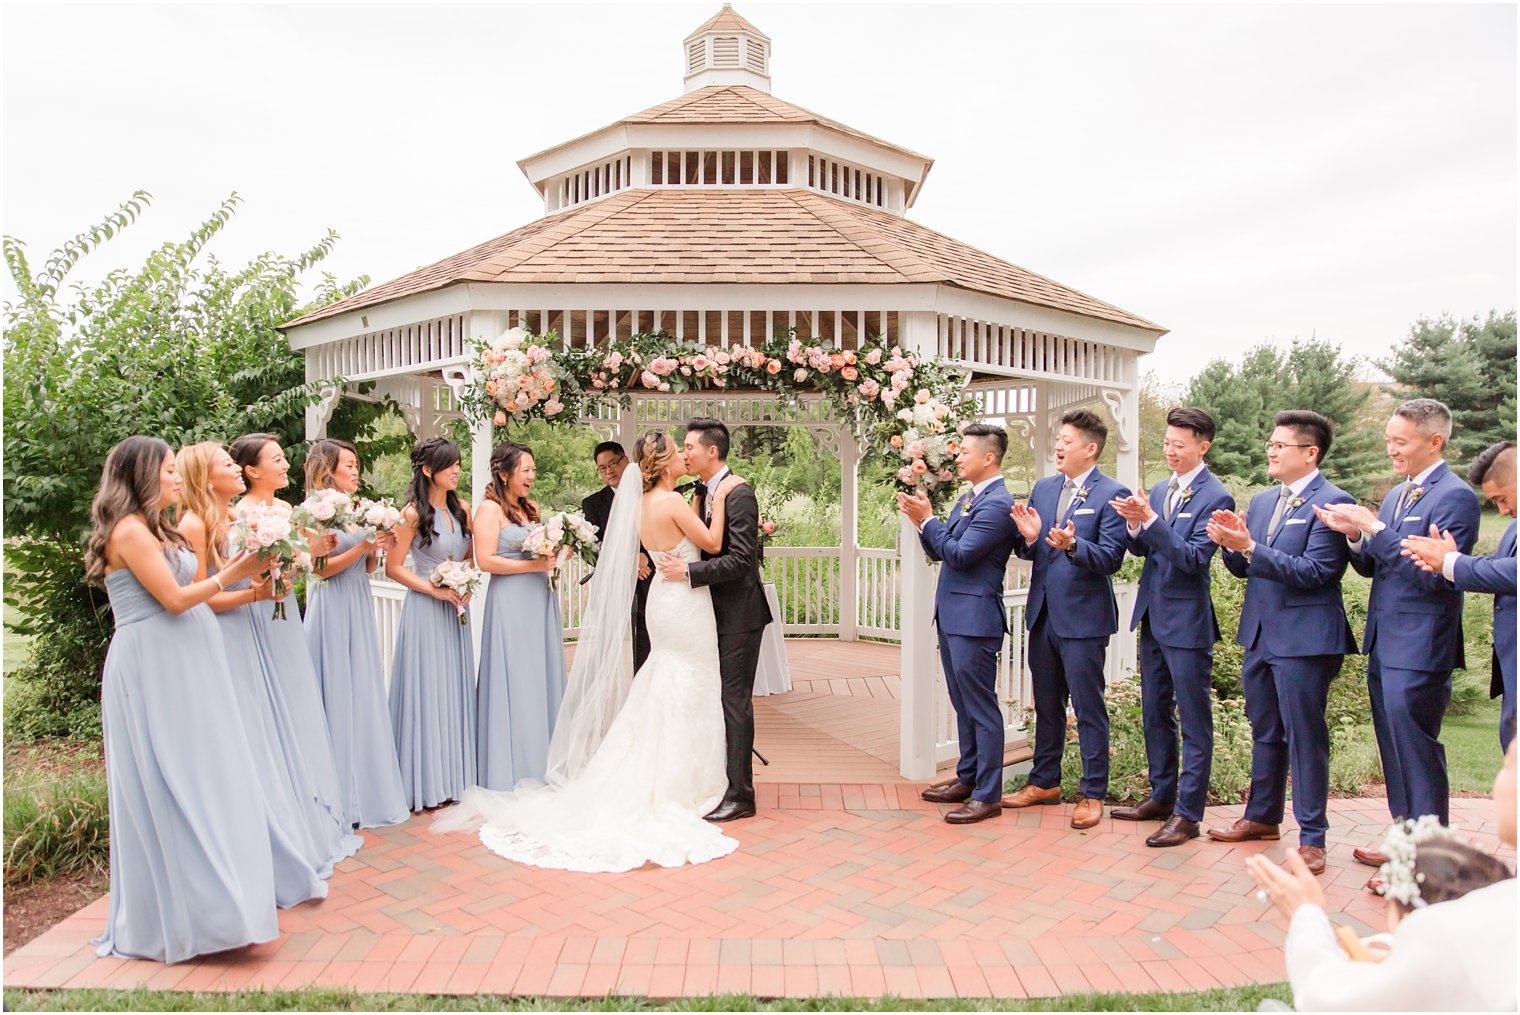 light blue wedding party inspiration photographed by Idalia Photography at Chauncey Hotel